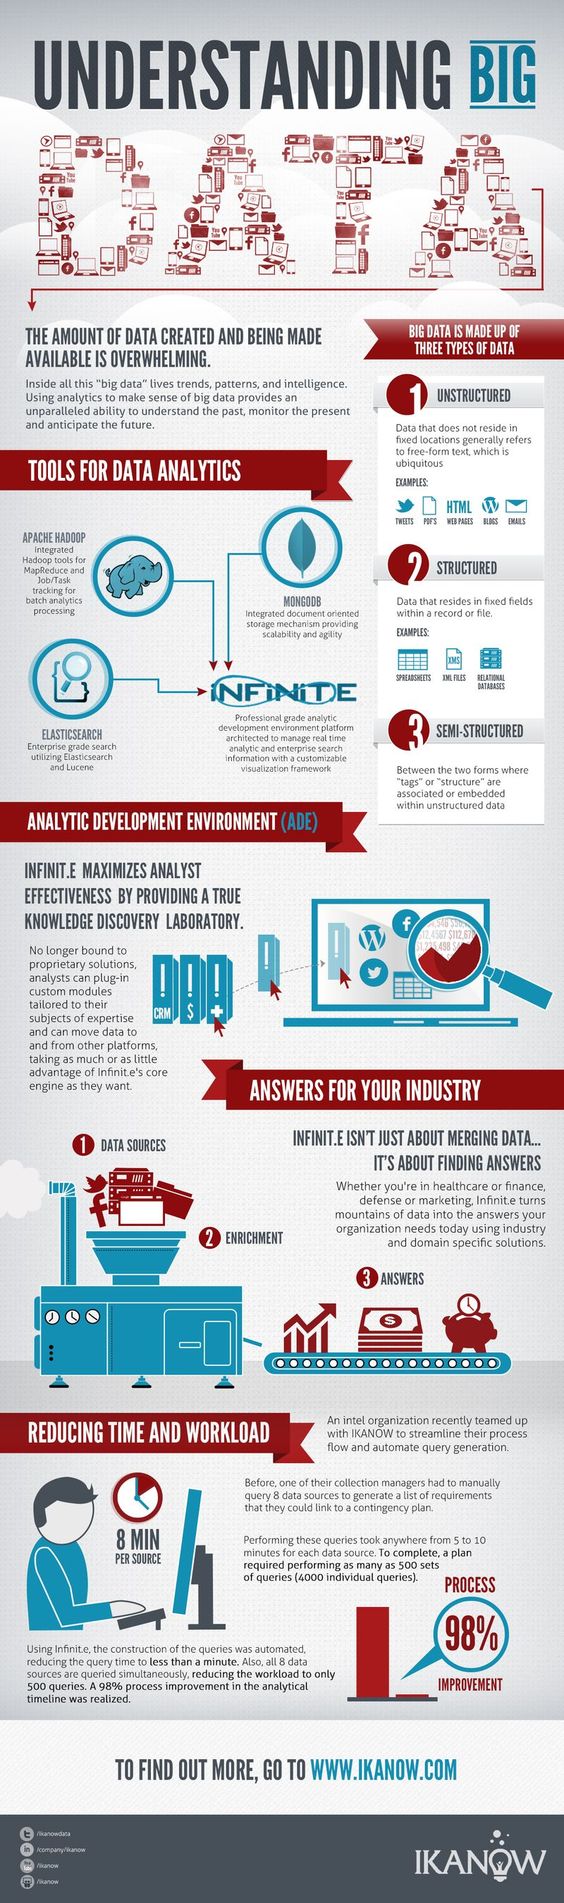 What Is Big Data And What Are Some Tools For Analytics? #bigdata #Infographic